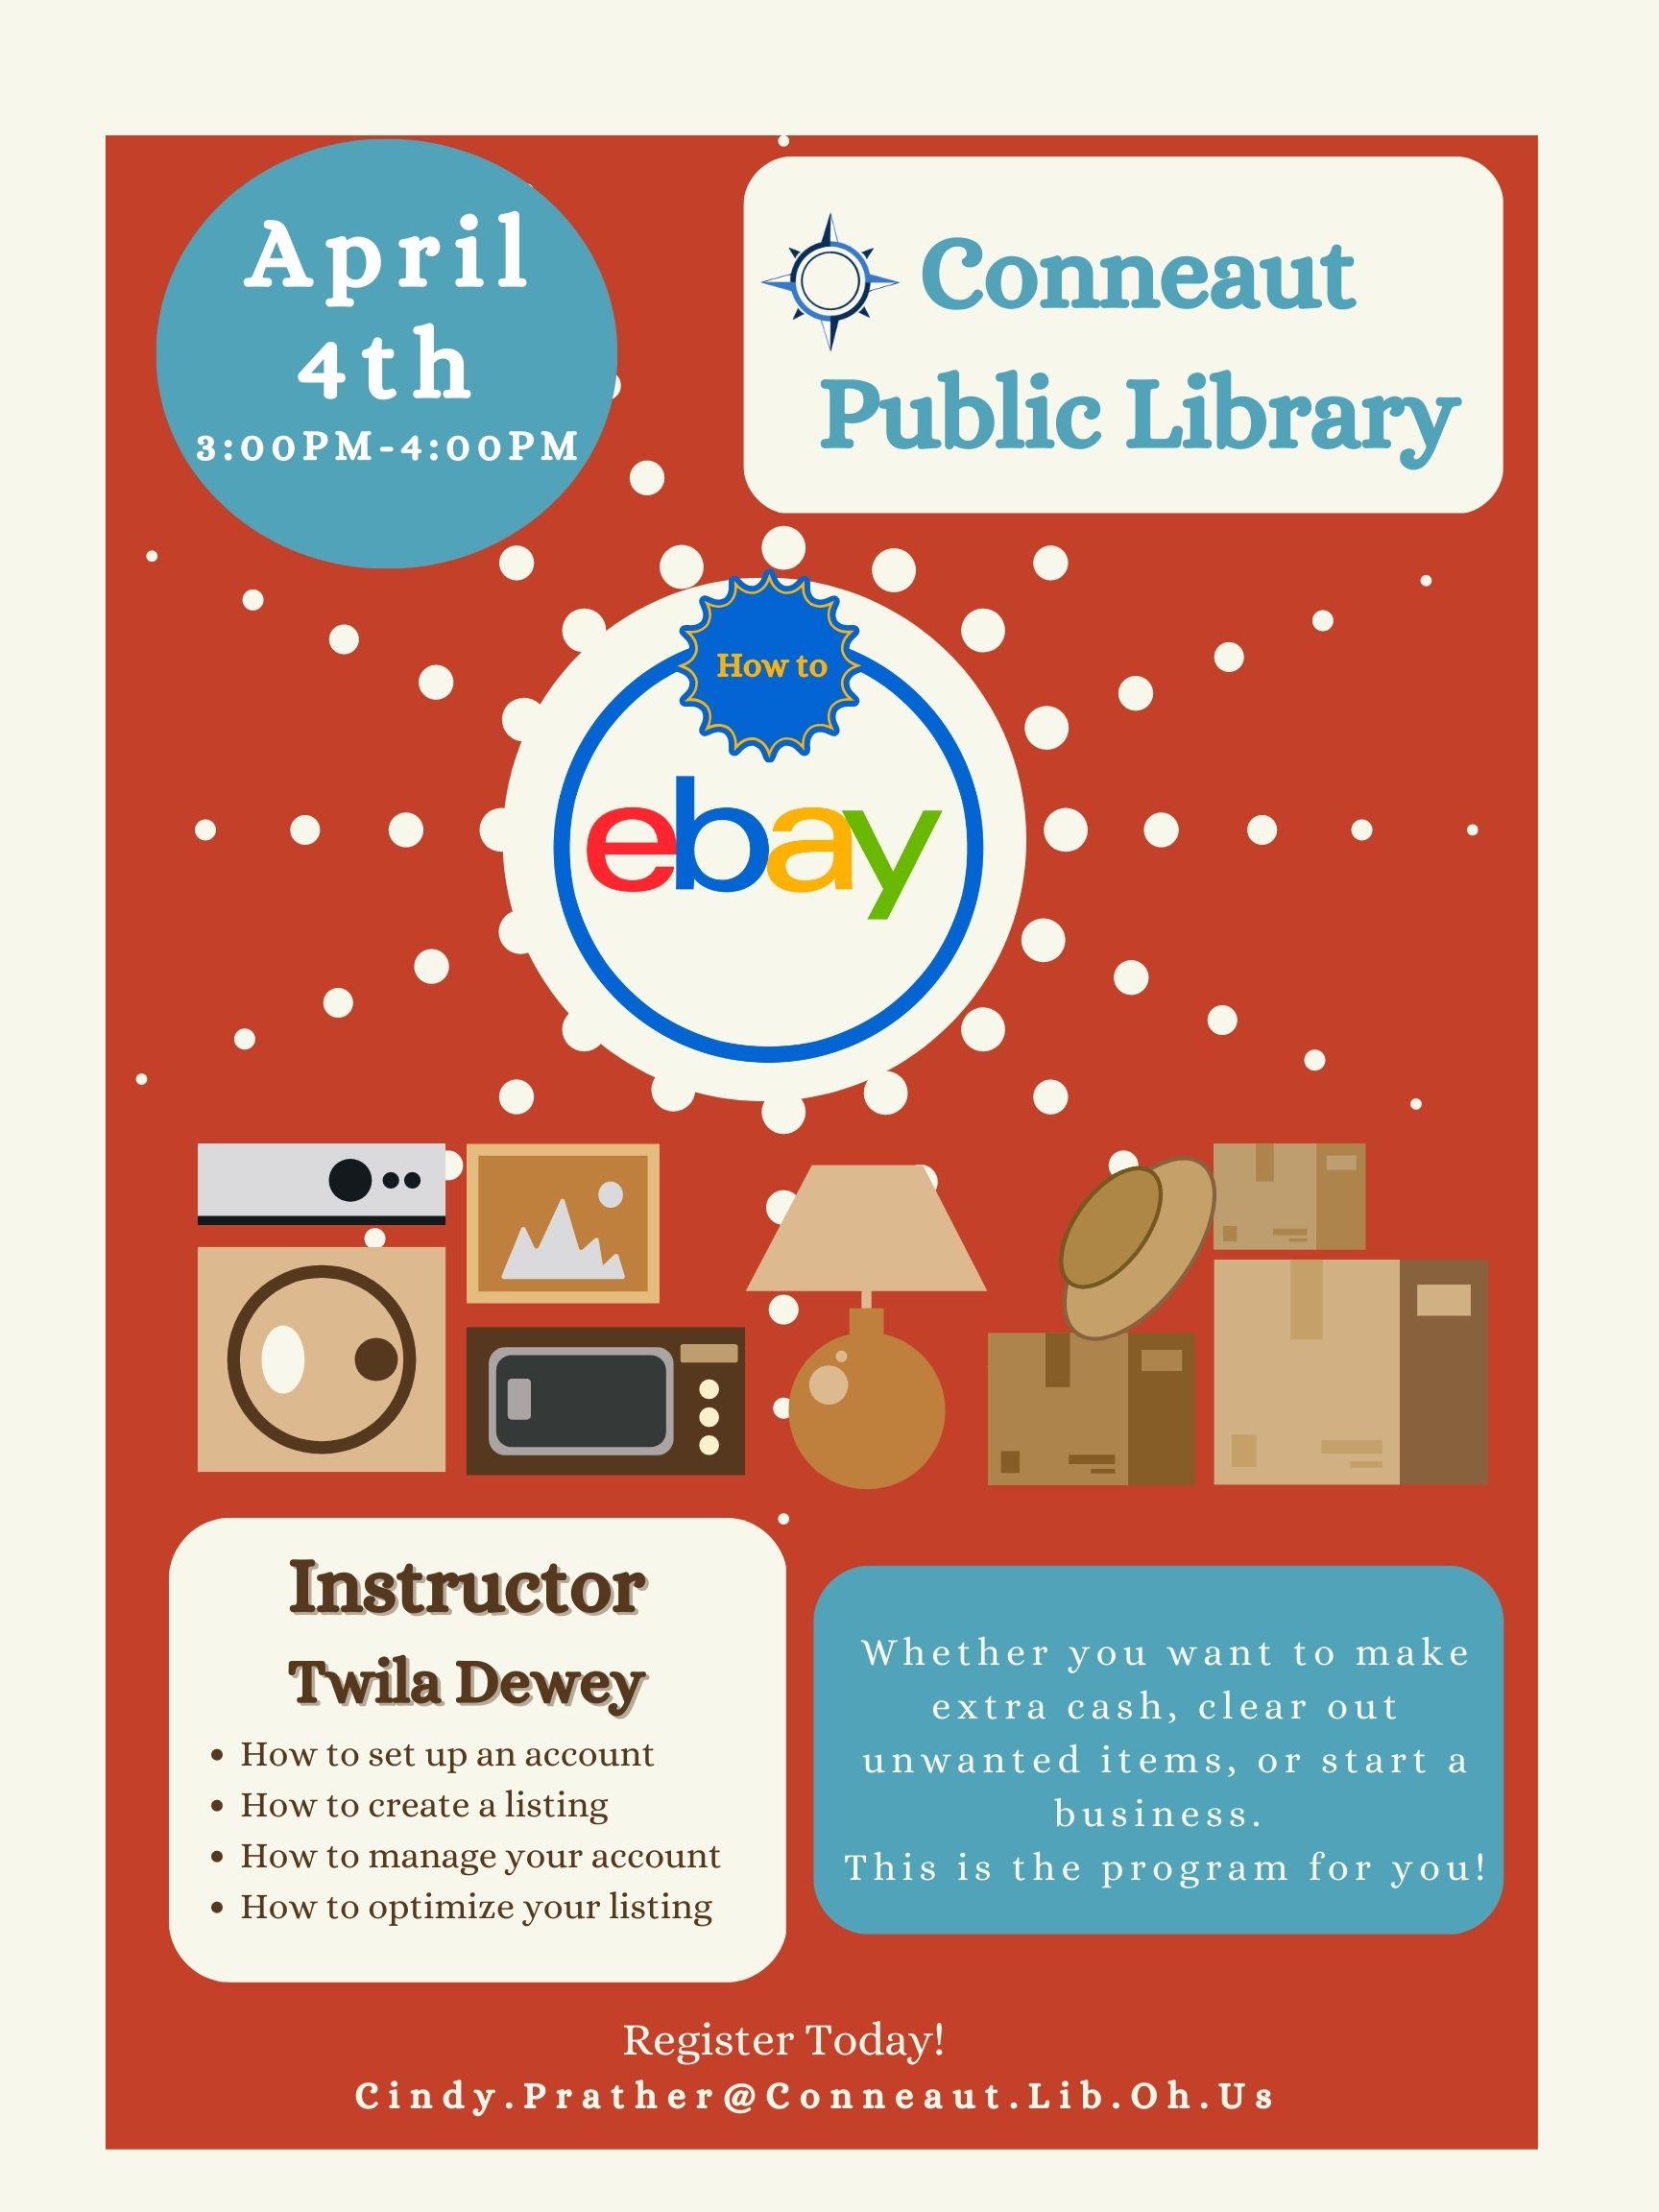 how to ebay flyer